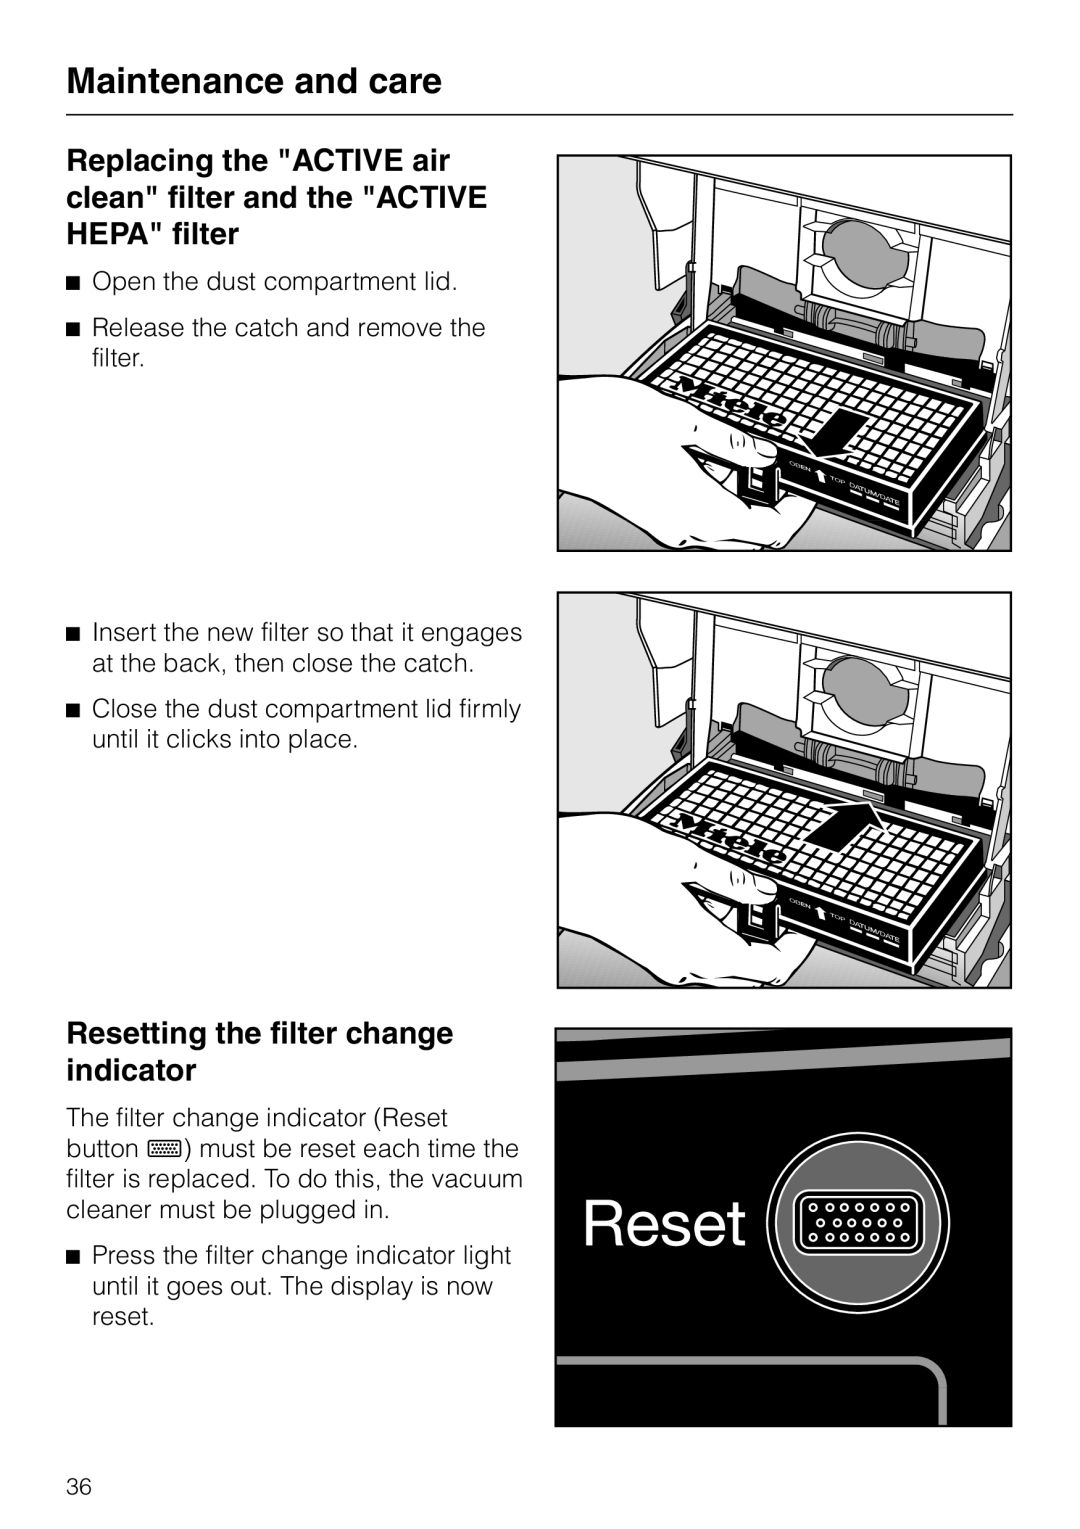 Miele S 600, S 648, S 548, S 500 operating instructions Maintenance and care, Resetting the filter change indicator 